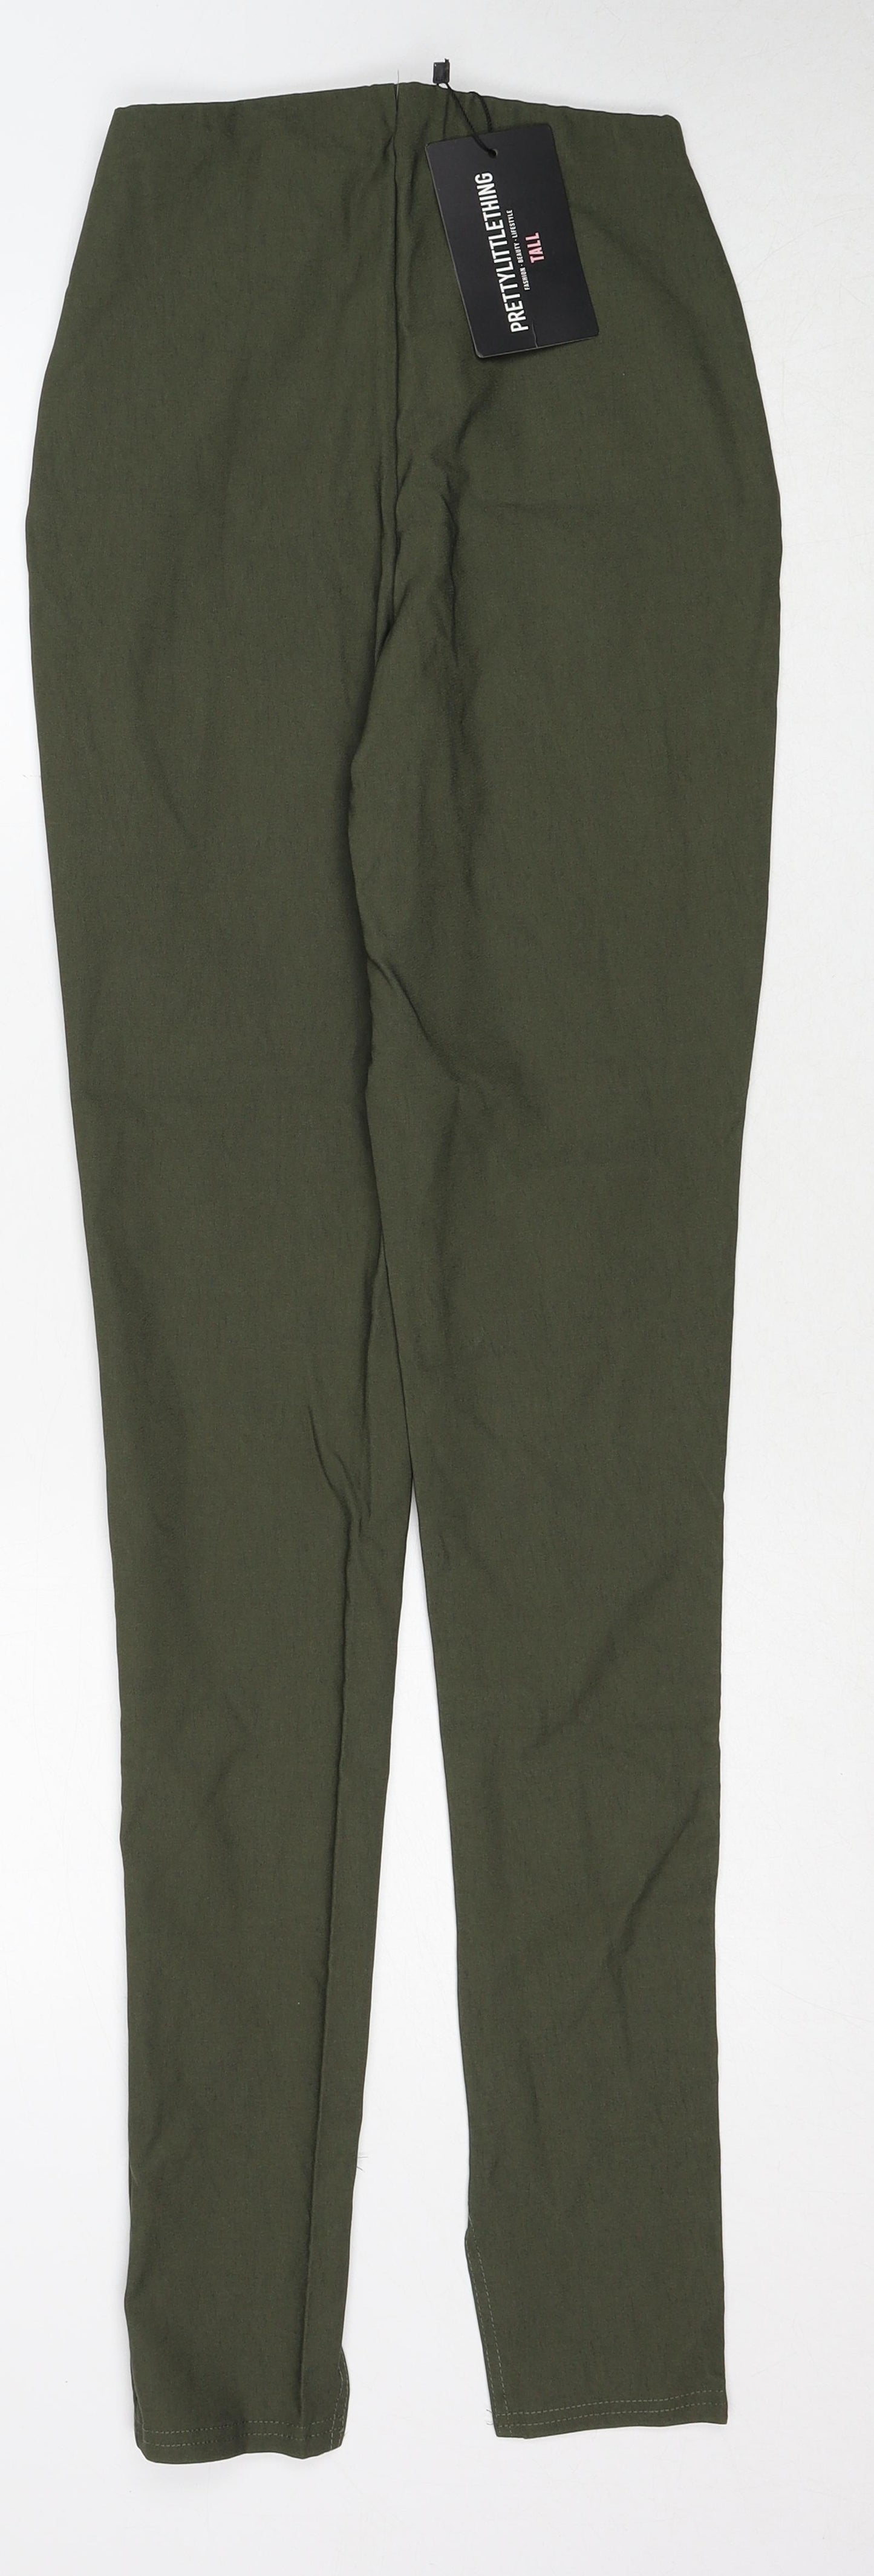 PRETTYLITTLETHING Womens Green Polyester Trousers Size 6 Regular Zip